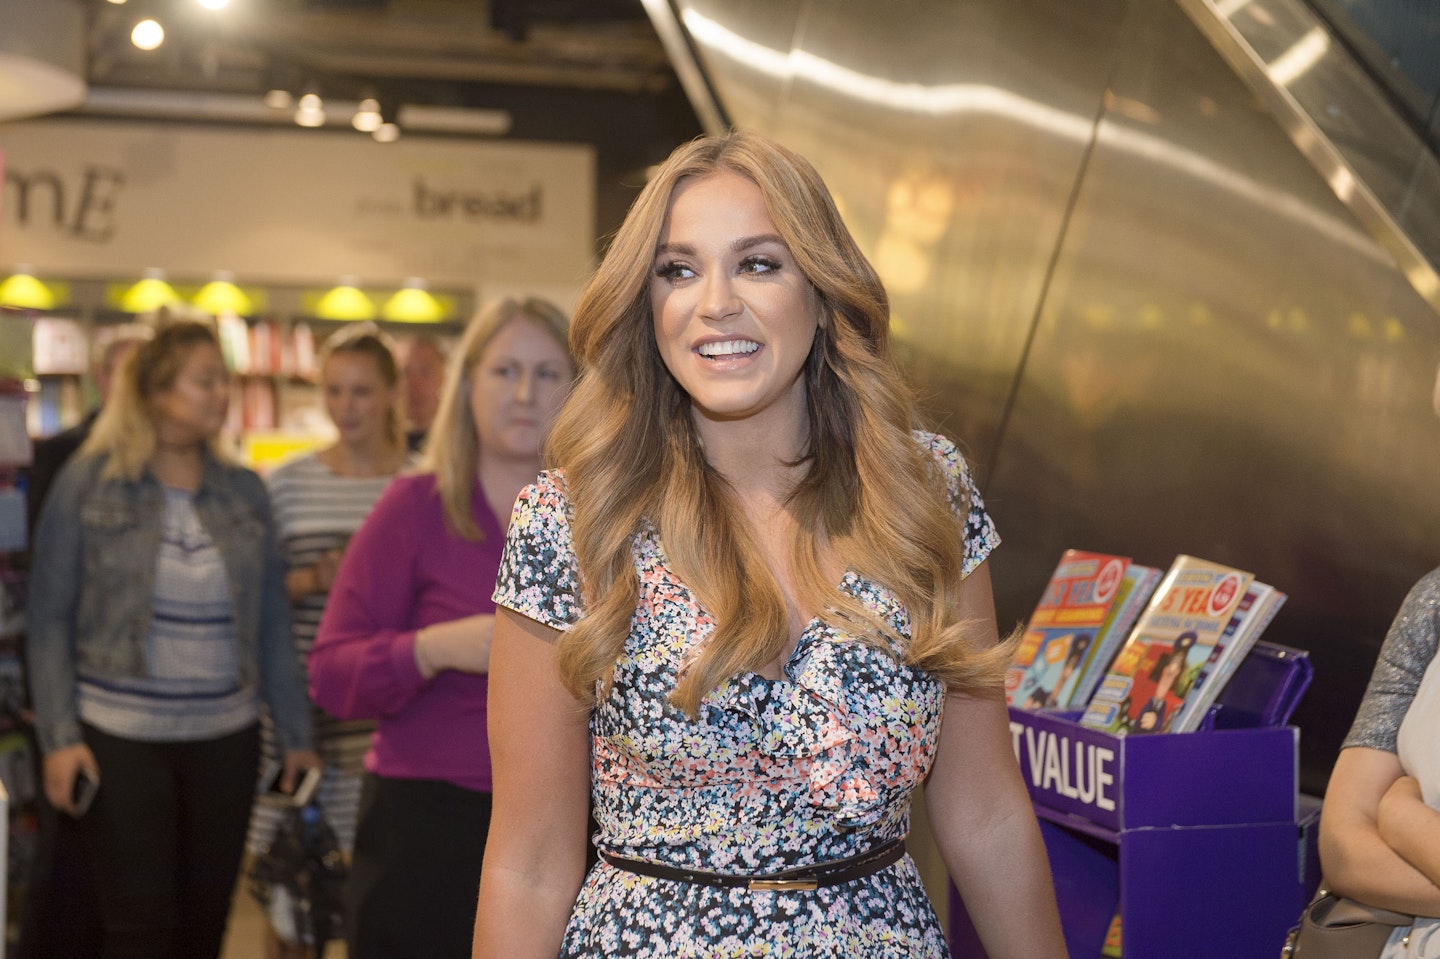 Vicky signs copies of her book for fans